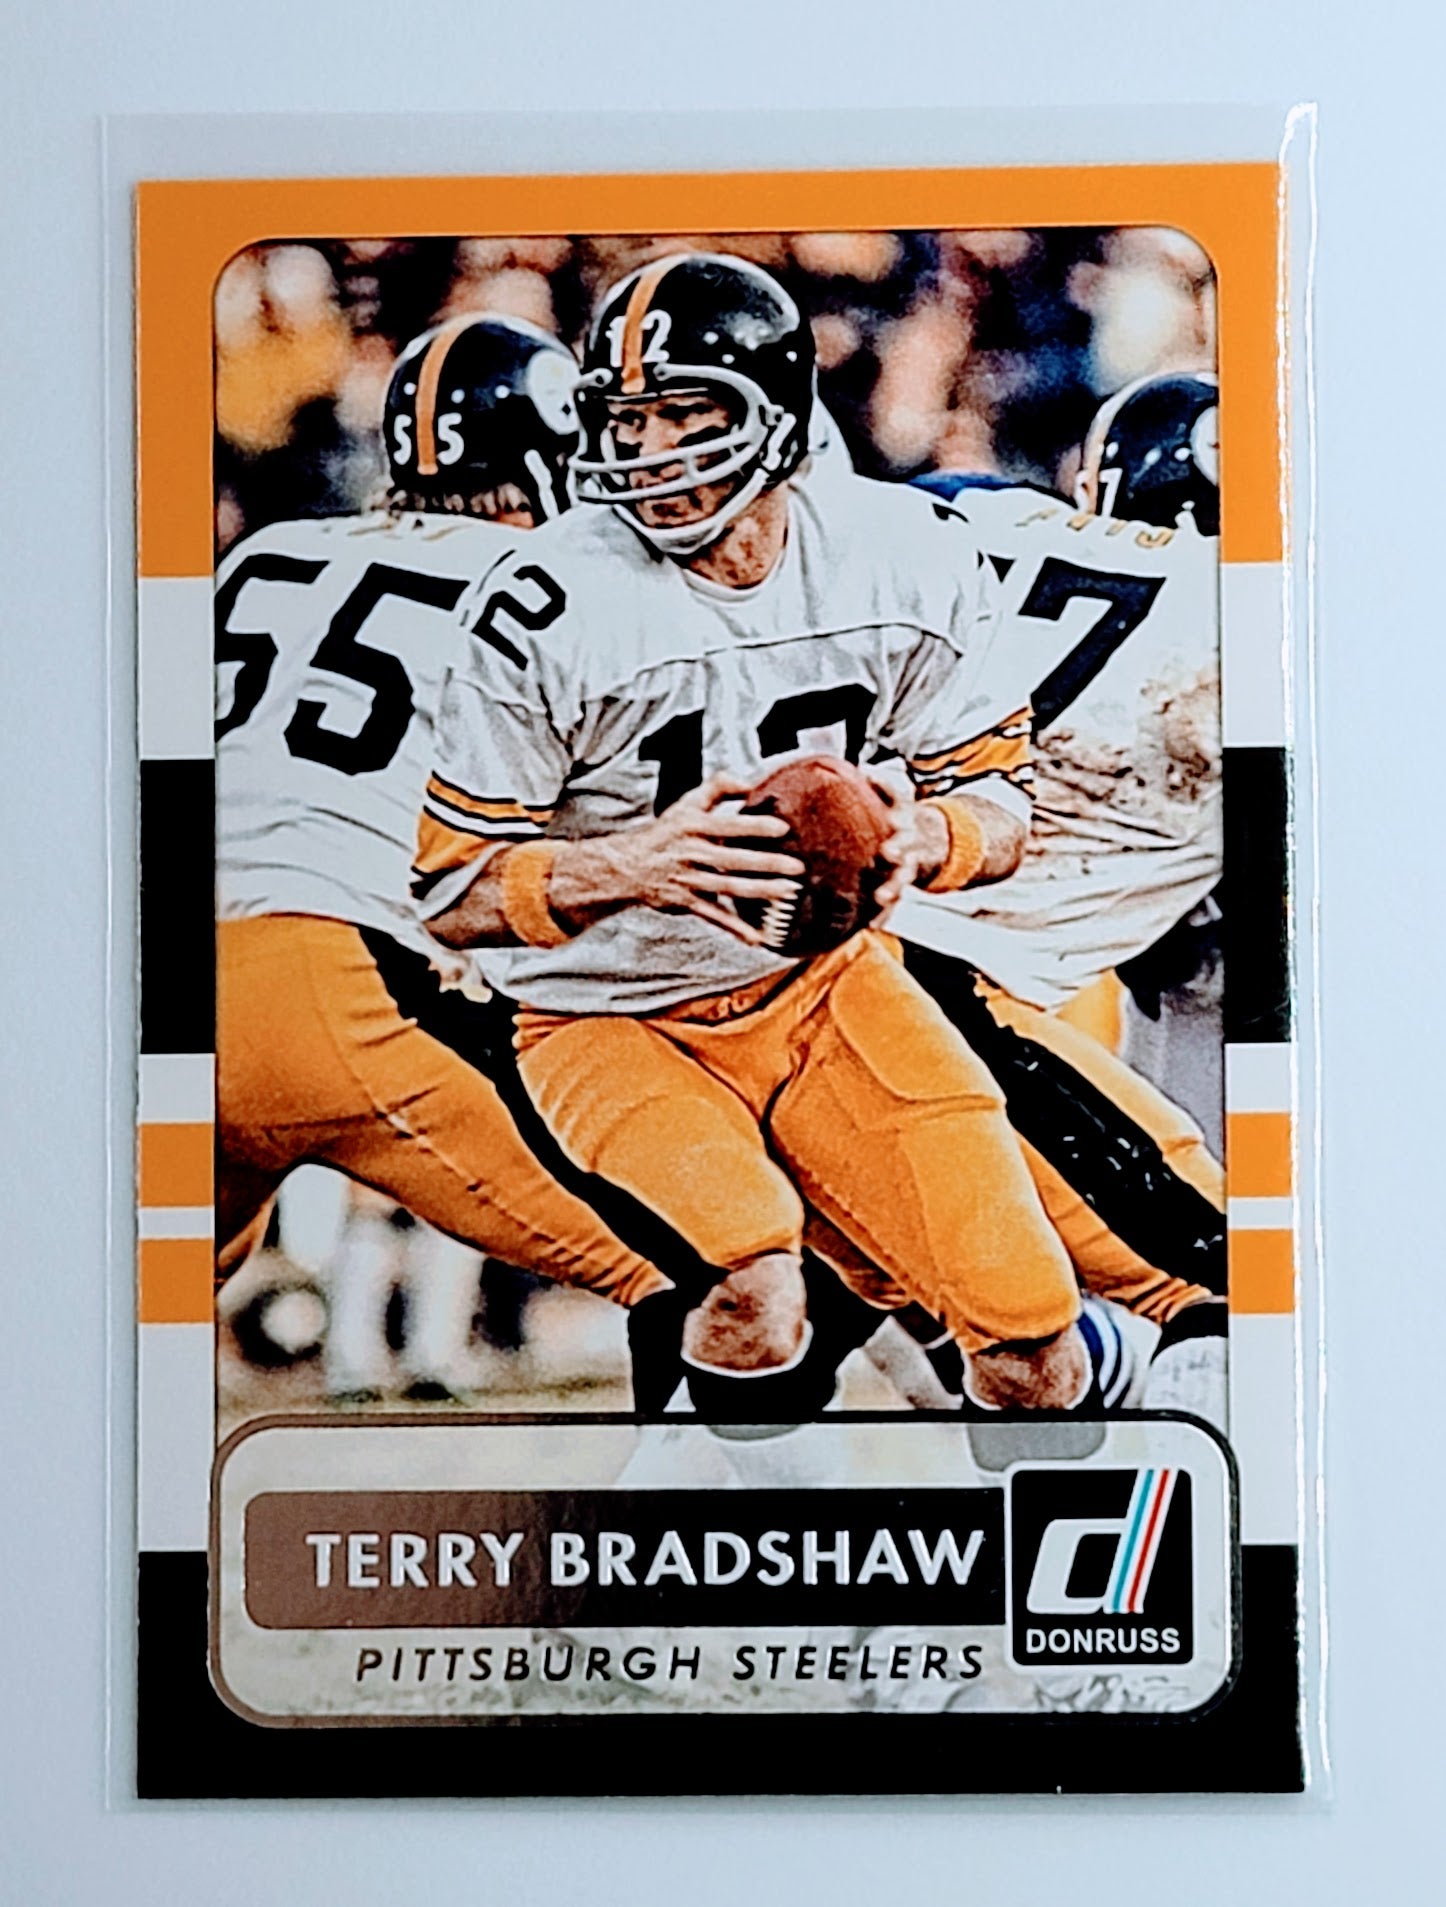 2015 Donruss Terry
  Bradshaw   Football Card  TH13C simple Xclusive Collectibles   